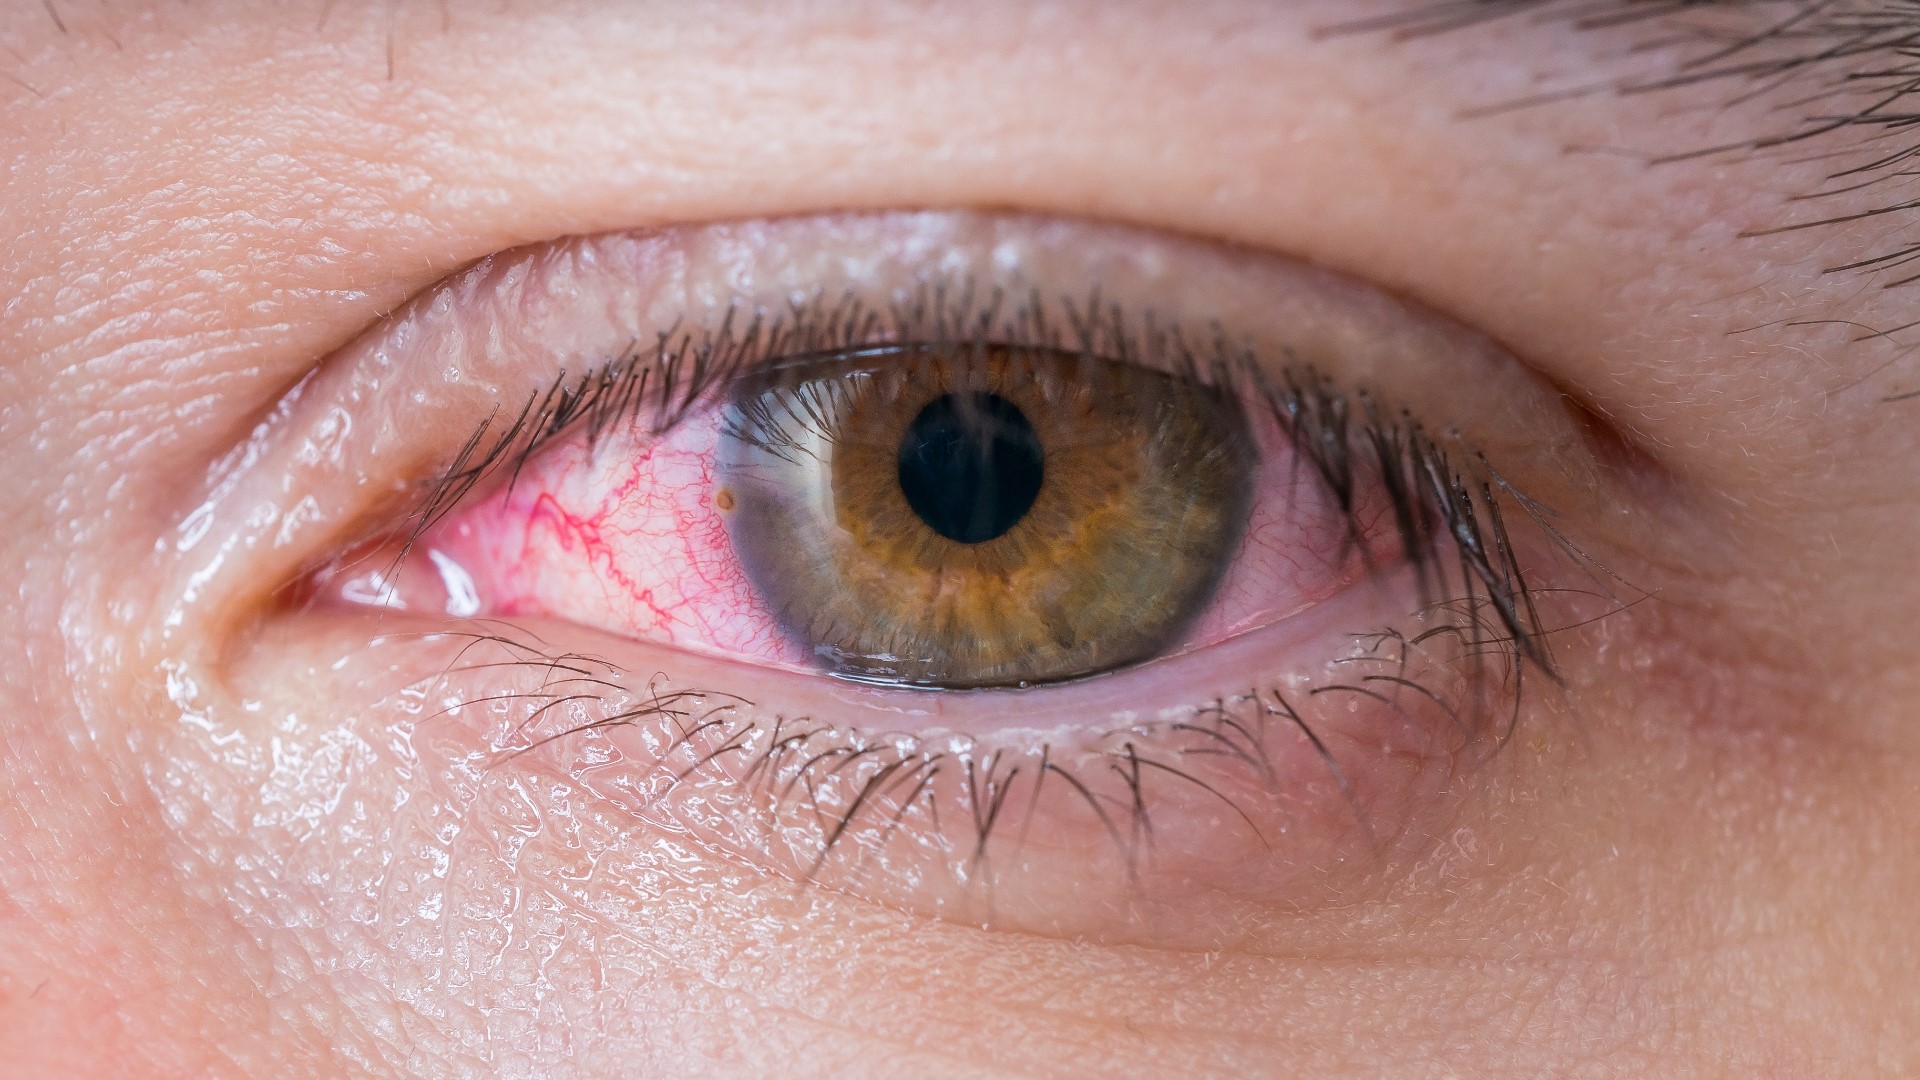 Conjunctivitis is a main symptom of the latest COVID Omicron sub-variant, XBB.1.16, dubbed 'Arcturus.' But that doesn't mean the rise in cases is related.